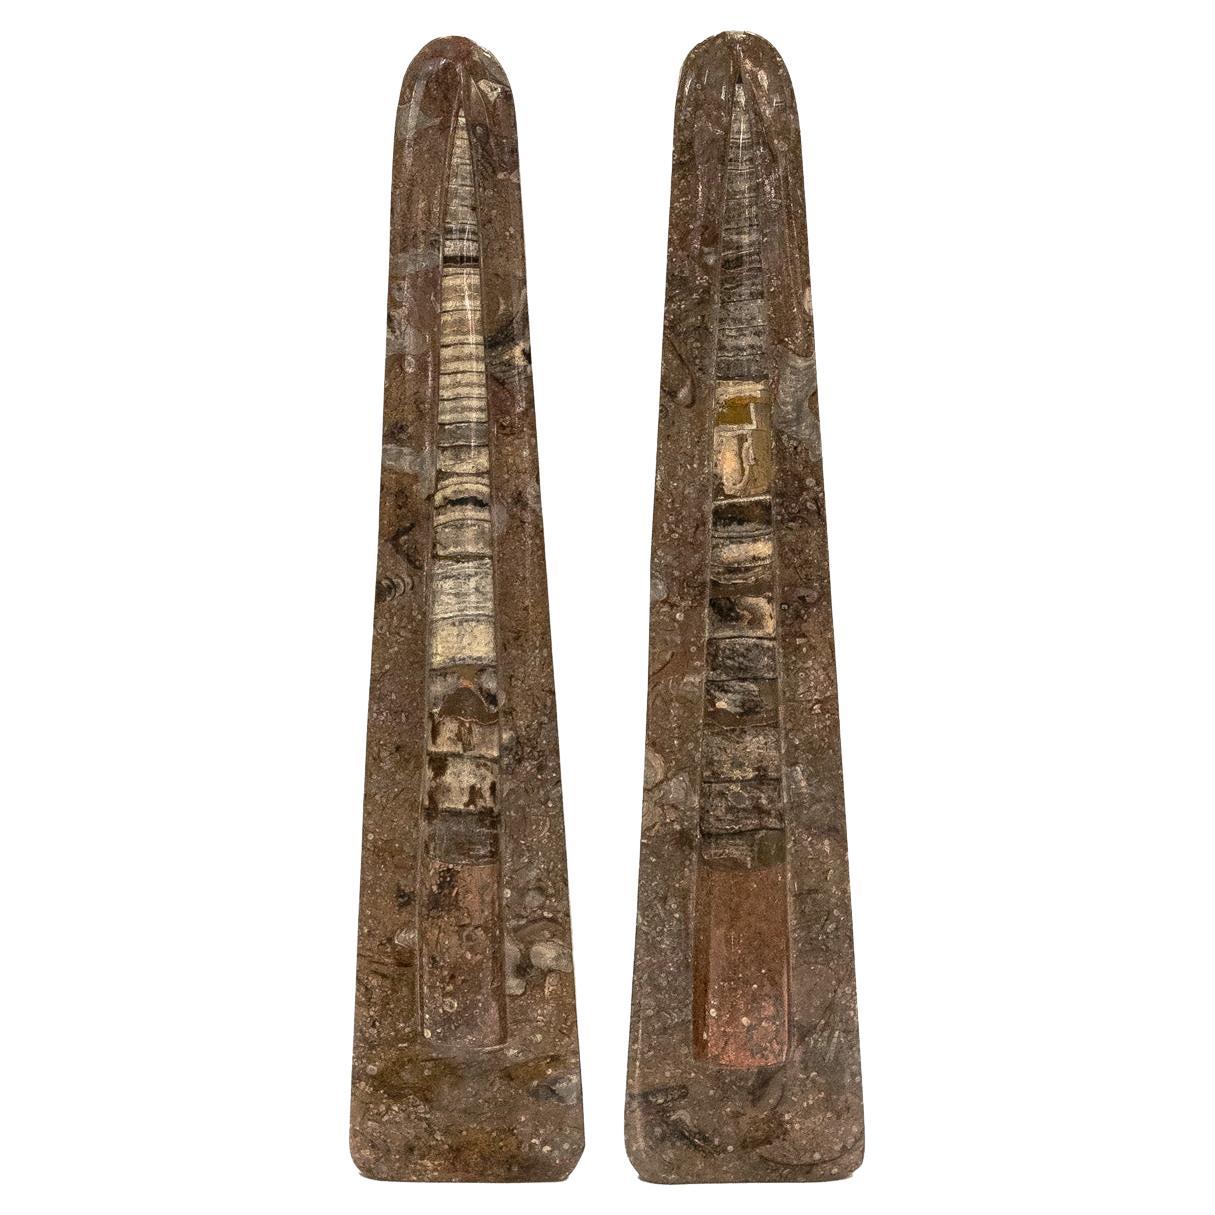 Exceptional Pair of Obelisk Shaped Fossil Sculptures 1980s For Sale